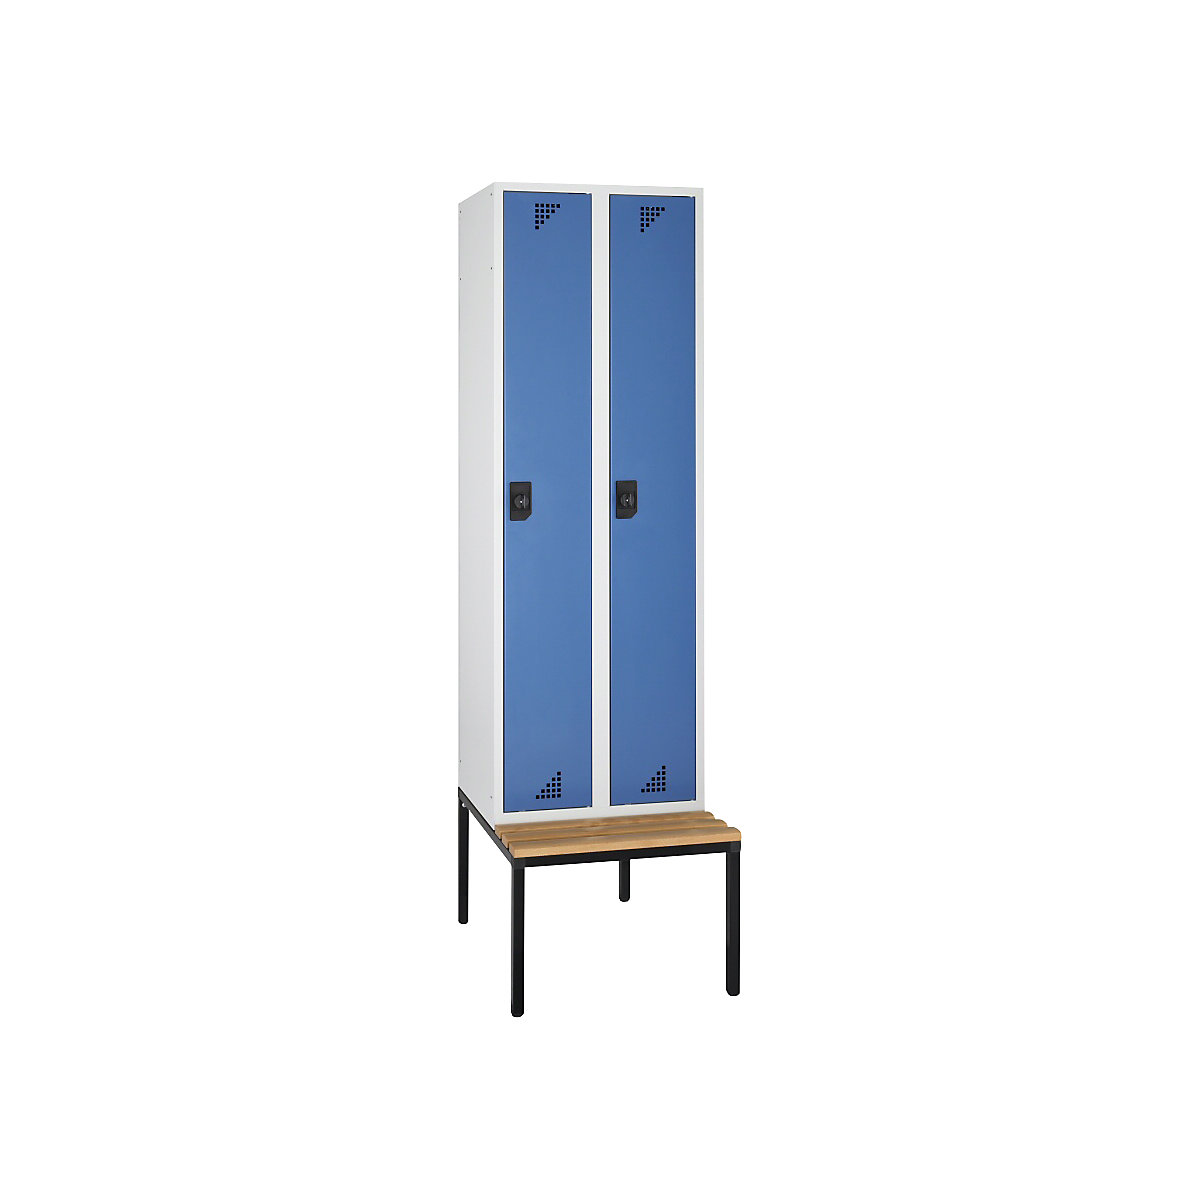 Multi-purpose cupboard and cloakroom locker – eurokraft pro, with seat bench, 2 compartments, width 600 mm, brilliant blue doors-5